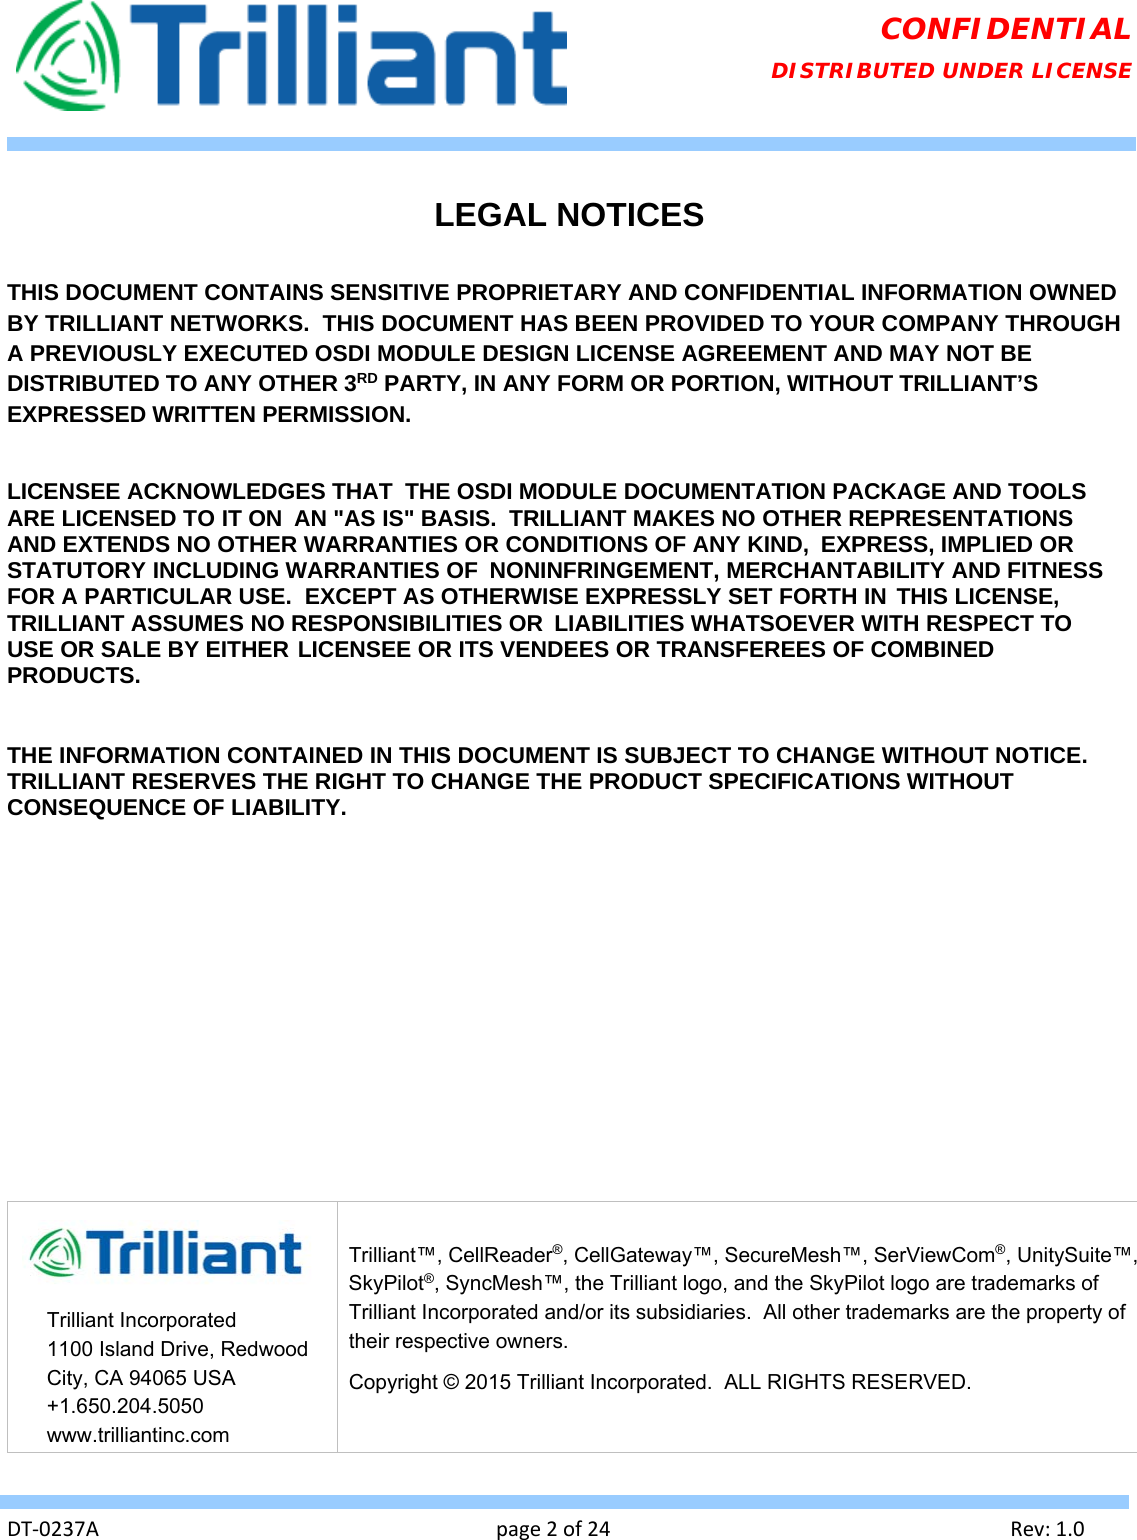   DT‐0237Apage2of24Rev:1.0CONFIDENTIAL DISTRIBUTED UNDER LICENSE  LEGAL NOTICES  THIS DOCUMENT CONTAINS SENSITIVE PROPRIETARY AND CONFIDENTIAL INFORMATION OWNED BY TRILLIANT NETWORKS.  THIS DOCUMENT HAS BEEN PROVIDED TO YOUR COMPANY THROUGH A PREVIOUSLY EXECUTED OSDI MODULE DESIGN LICENSE AGREEMENT AND MAY NOT BE DISTRIBUTED TO ANY OTHER 3RD PARTY, IN ANY FORM OR PORTION, WITHOUT TRILLIANT’S EXPRESSED WRITTEN PERMISSION.  LICENSEE ACKNOWLEDGES THAT  THE OSDI MODULE DOCUMENTATION PACKAGE AND TOOLS ARE LICENSED TO IT ON  AN &quot;AS IS&quot; BASIS.  TRILLIANT MAKES NO OTHER REPRESENTATIONS AND EXTENDS NO OTHER WARRANTIES OR CONDITIONS OF ANY KIND,  EXPRESS, IMPLIED OR STATUTORY INCLUDING WARRANTIES OF  NONINFRINGEMENT, MERCHANTABILITY AND FITNESS FOR A PARTICULAR USE.  EXCEPT AS OTHERWISE EXPRESSLY SET FORTH IN THIS LICENSE, TRILLIANT ASSUMES NO RESPONSIBILITIES OR  LIABILITIES WHATSOEVER WITH RESPECT TO USE OR SALE BY EITHER LICENSEE OR ITS VENDEES OR TRANSFEREES OF COMBINED PRODUCTS.   THE INFORMATION CONTAINED IN THIS DOCUMENT IS SUBJECT TO CHANGE WITHOUT NOTICE. TRILLIANT RESERVES THE RIGHT TO CHANGE THE PRODUCT SPECIFICATIONS WITHOUT CONSEQUENCE OF LIABILITY.                   Trilliant Incorporated 1100 Island Drive, Redwood City, CA 94065 USA +1.650.204.5050 www.trilliantinc.com Trilliant™, CellReader®, CellGateway™, SecureMesh™, SerViewCom®, UnitySuite™, SkyPilot®, SyncMesh™, the Trilliant logo, and the SkyPilot logo are trademarks of Trilliant Incorporated and/or its subsidiaries.  All other trademarks are the property of their respective owners.   Copyright © 2015 Trilliant Incorporated.  ALL RIGHTS RESERVED. 